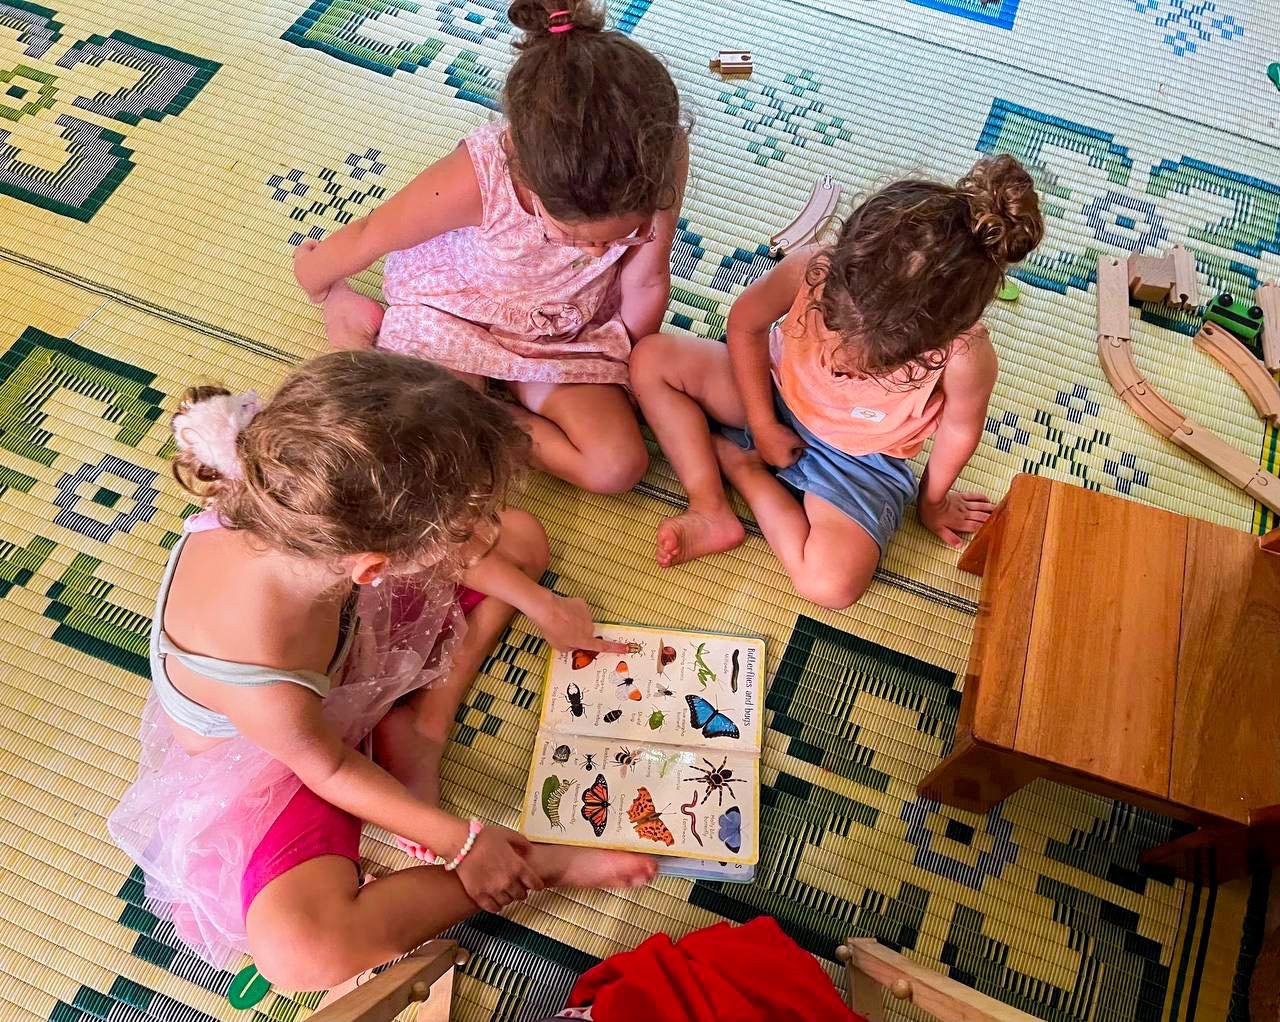 Afternoon relax time📚✨

In the afternoon, the children can choose what they would like to do - for example, reading, role-playing or even playing with wooden toys.

#kohphanganparents #circleofsunkindergarten #circleofsunphangan #kohphangankids #koh